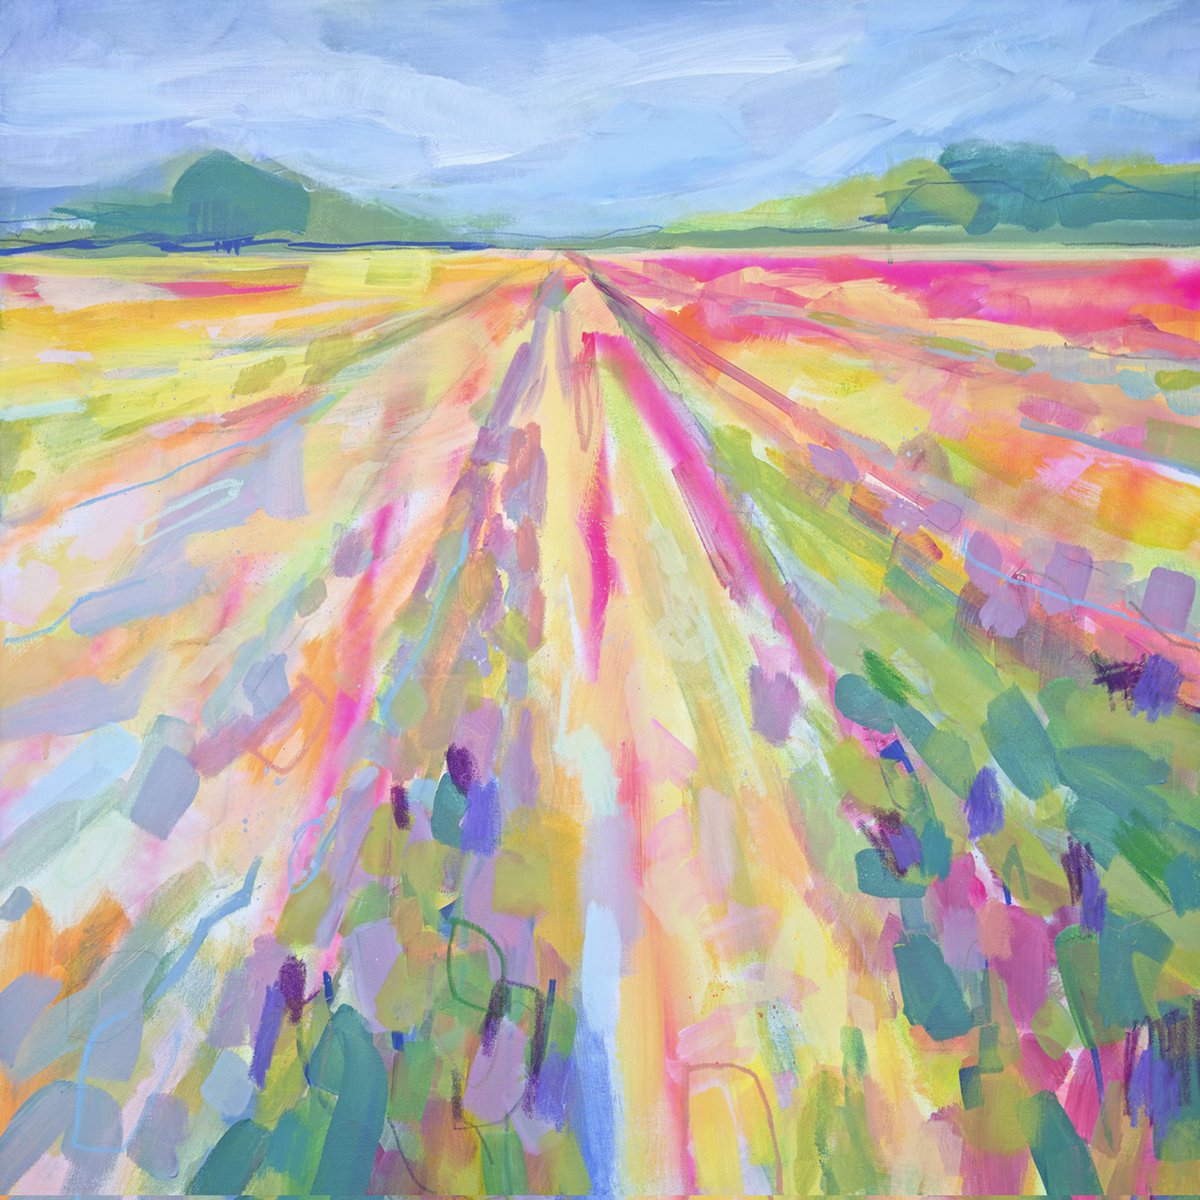 19-05-23 Landmark Arts Centre - Amy Wormald - Tulip Fields Ferry Road, Teddington, TW11 9NN Spring Art Fair. May 19-21. > 60 artists to discover. From prints to paintings and with prices ranging from £50 for prints to £4,000 for originals. Adm £5, conc £4, u 16s free.